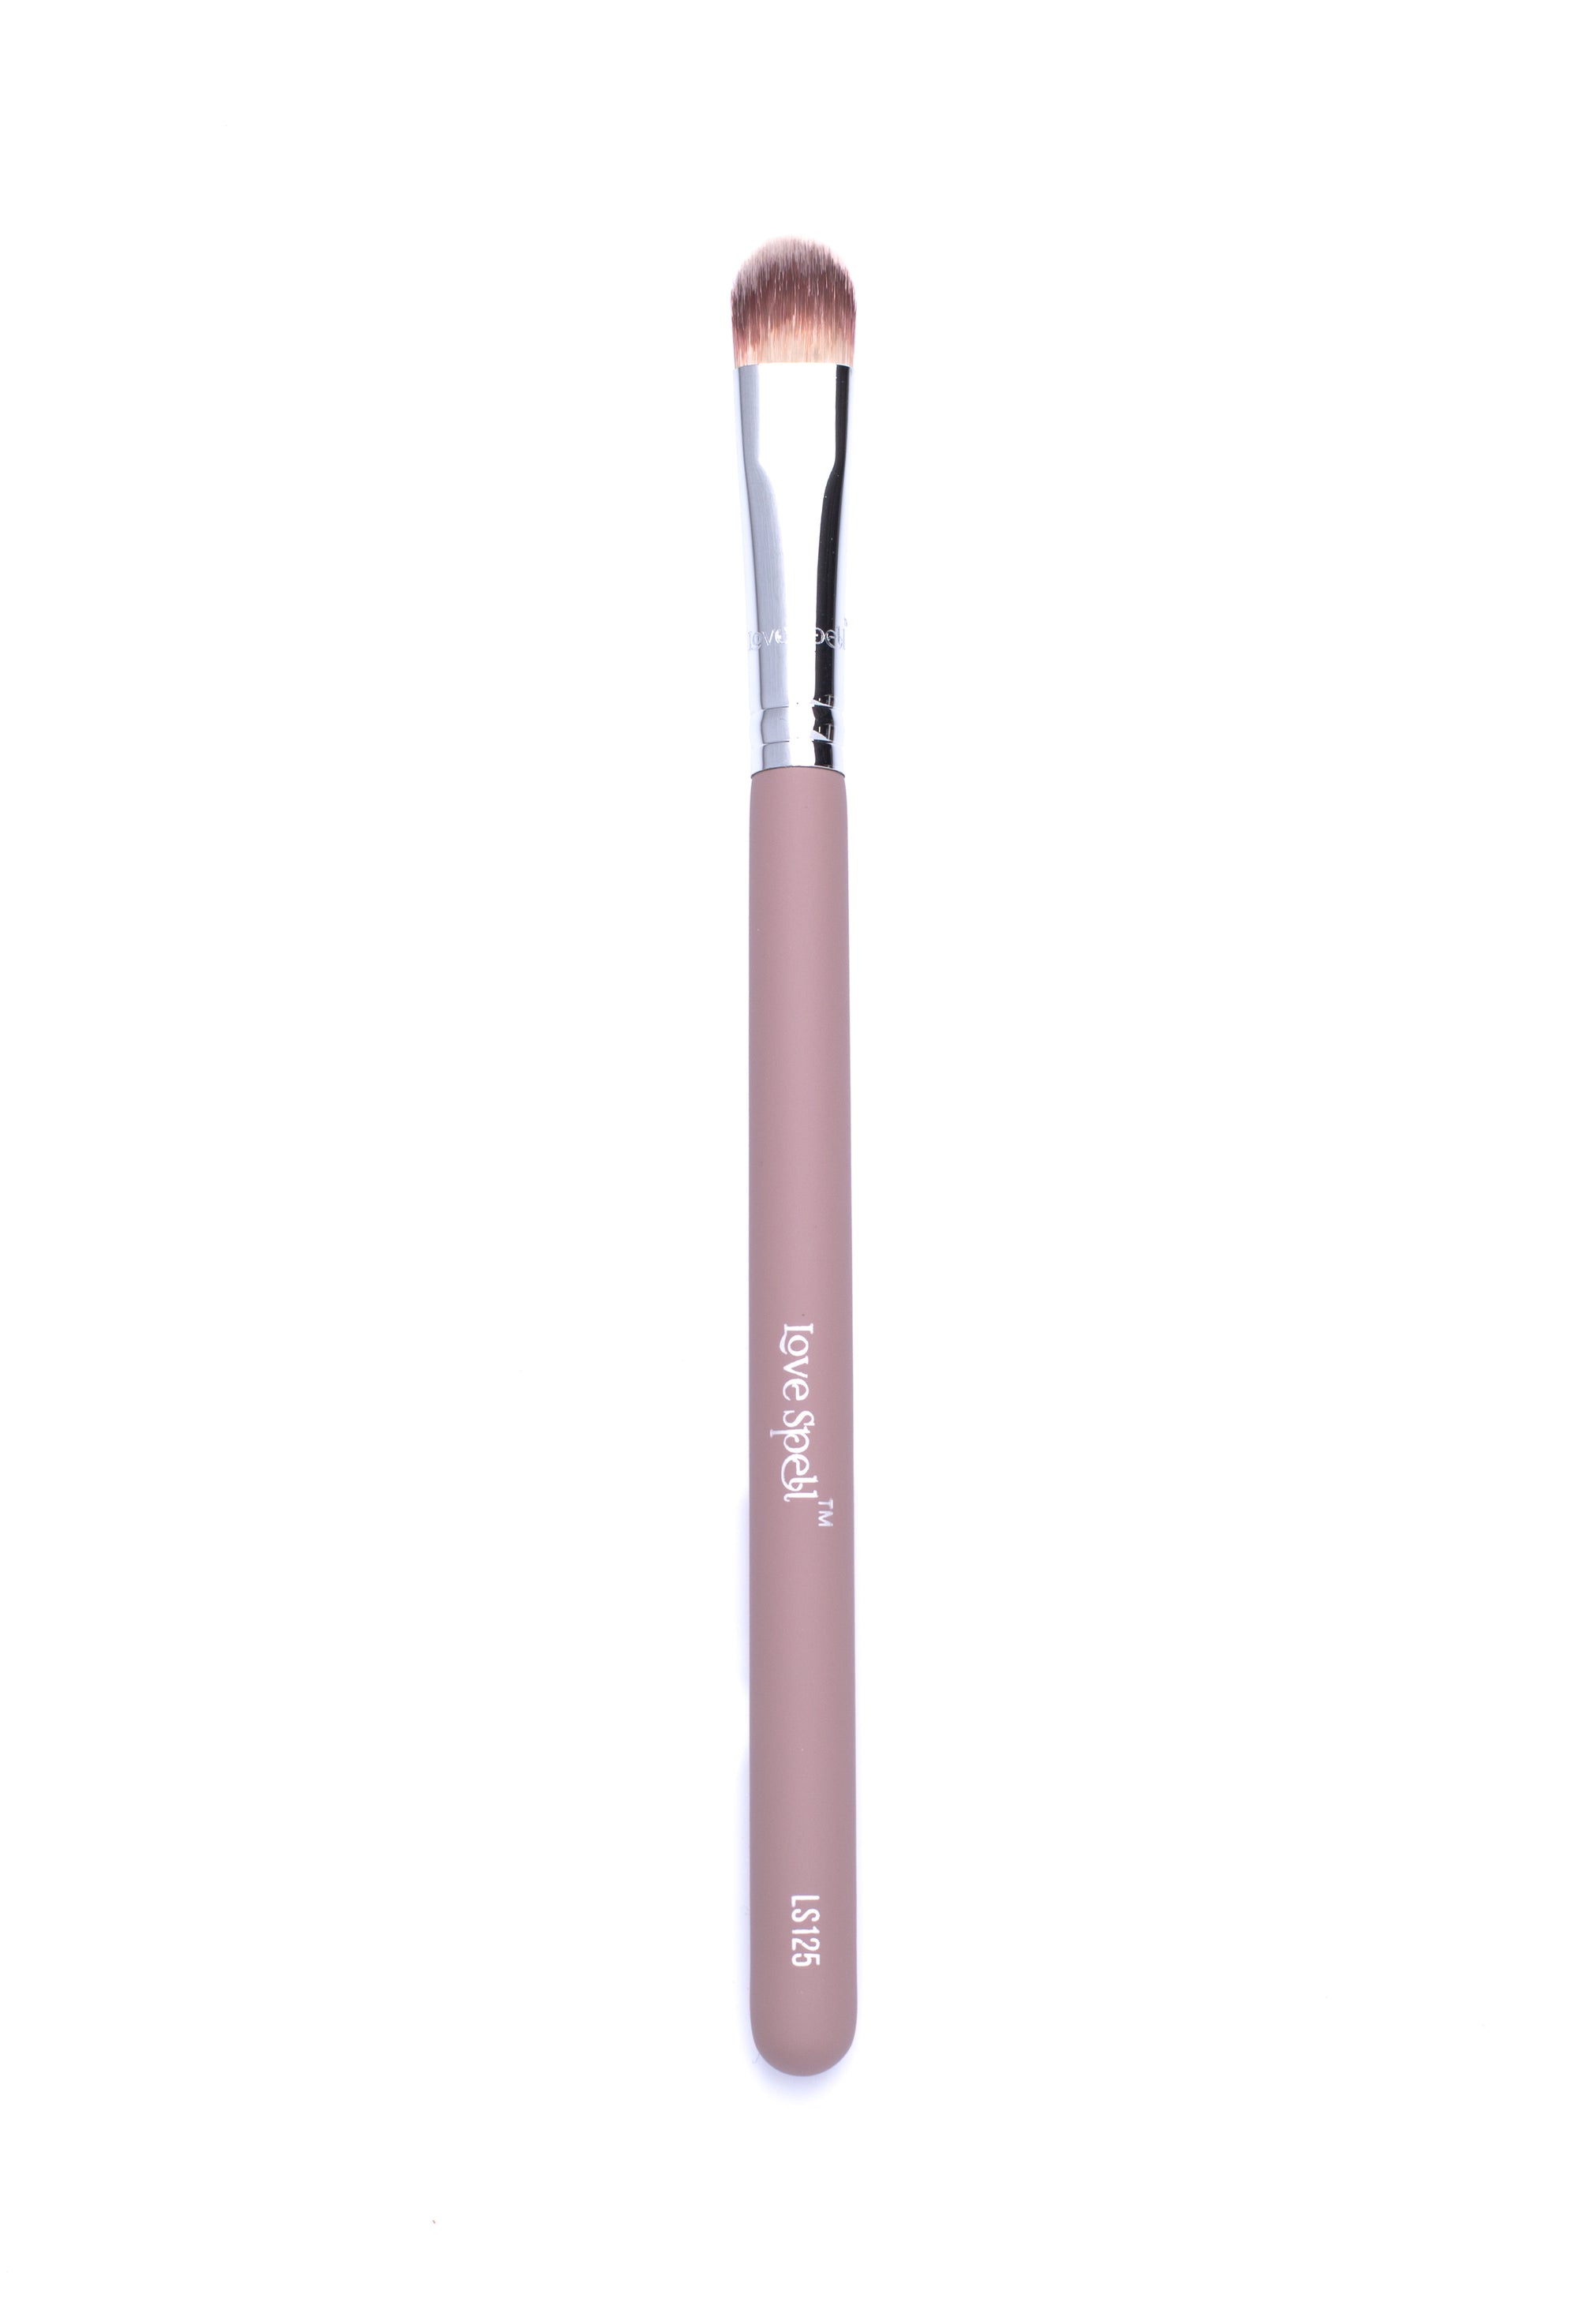 Sally's Spell - LS 125 large concealer brush